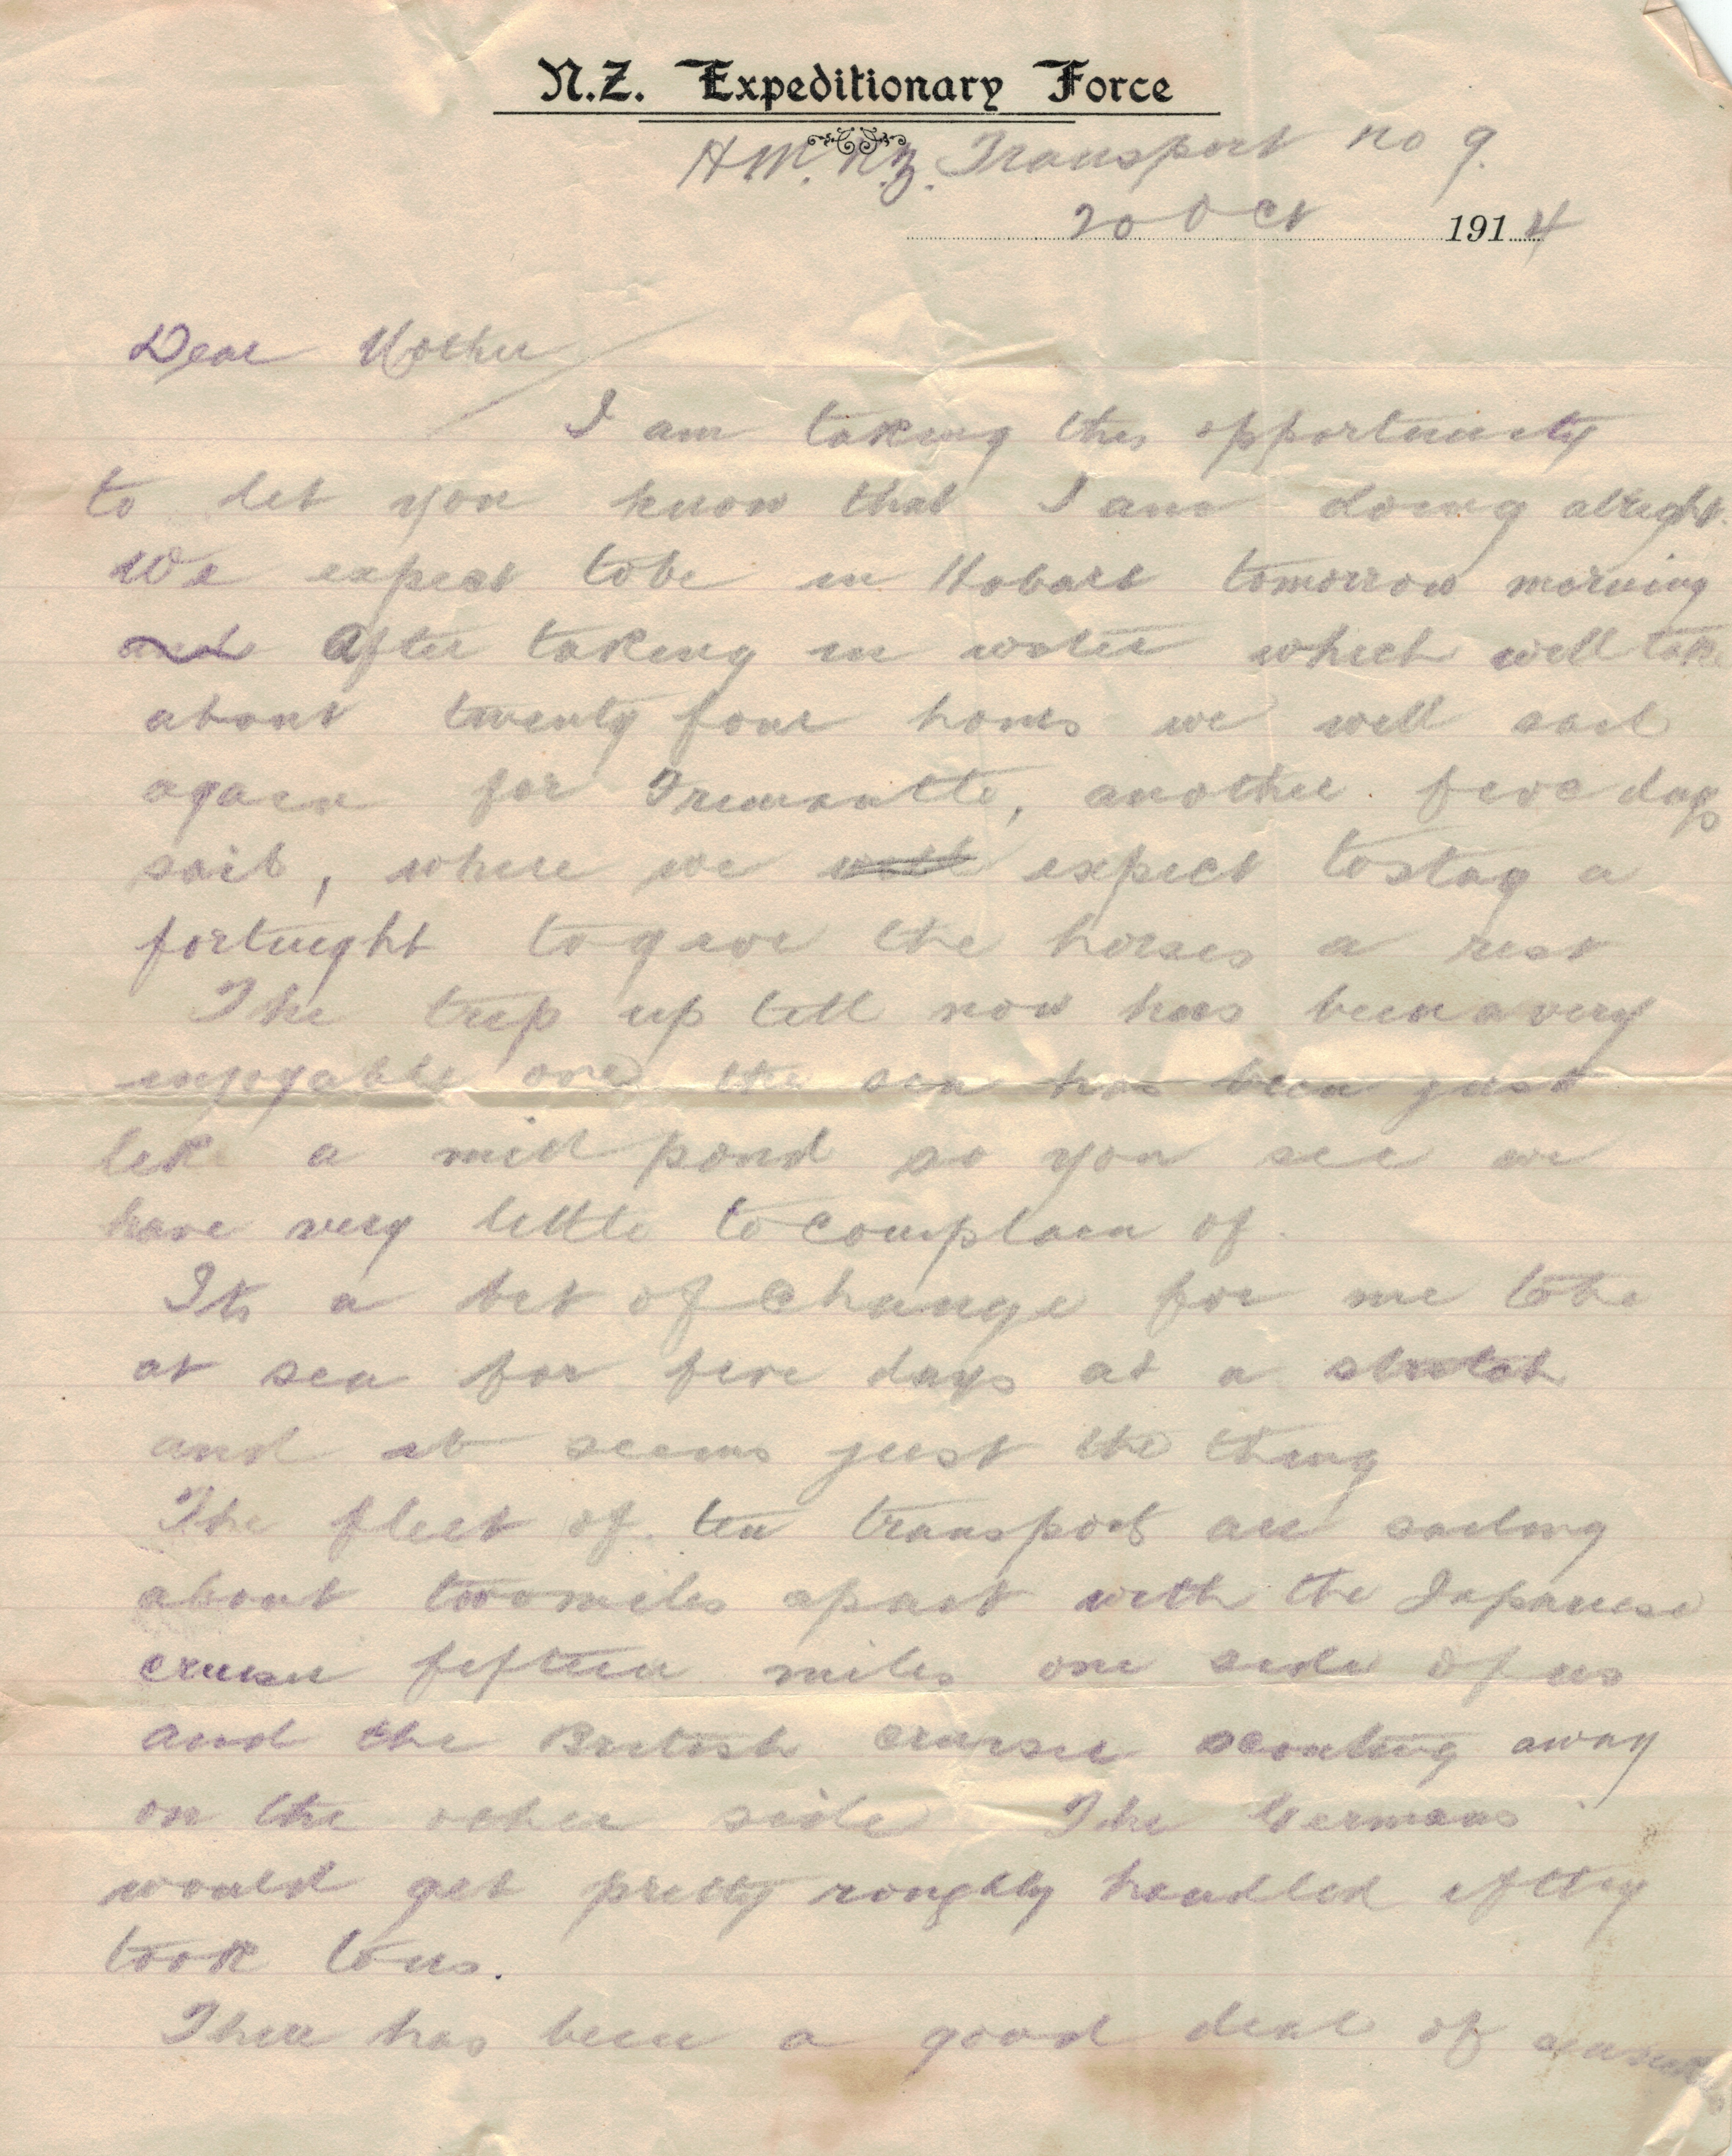 Bill Letter 20 Oct 1914 Page 1